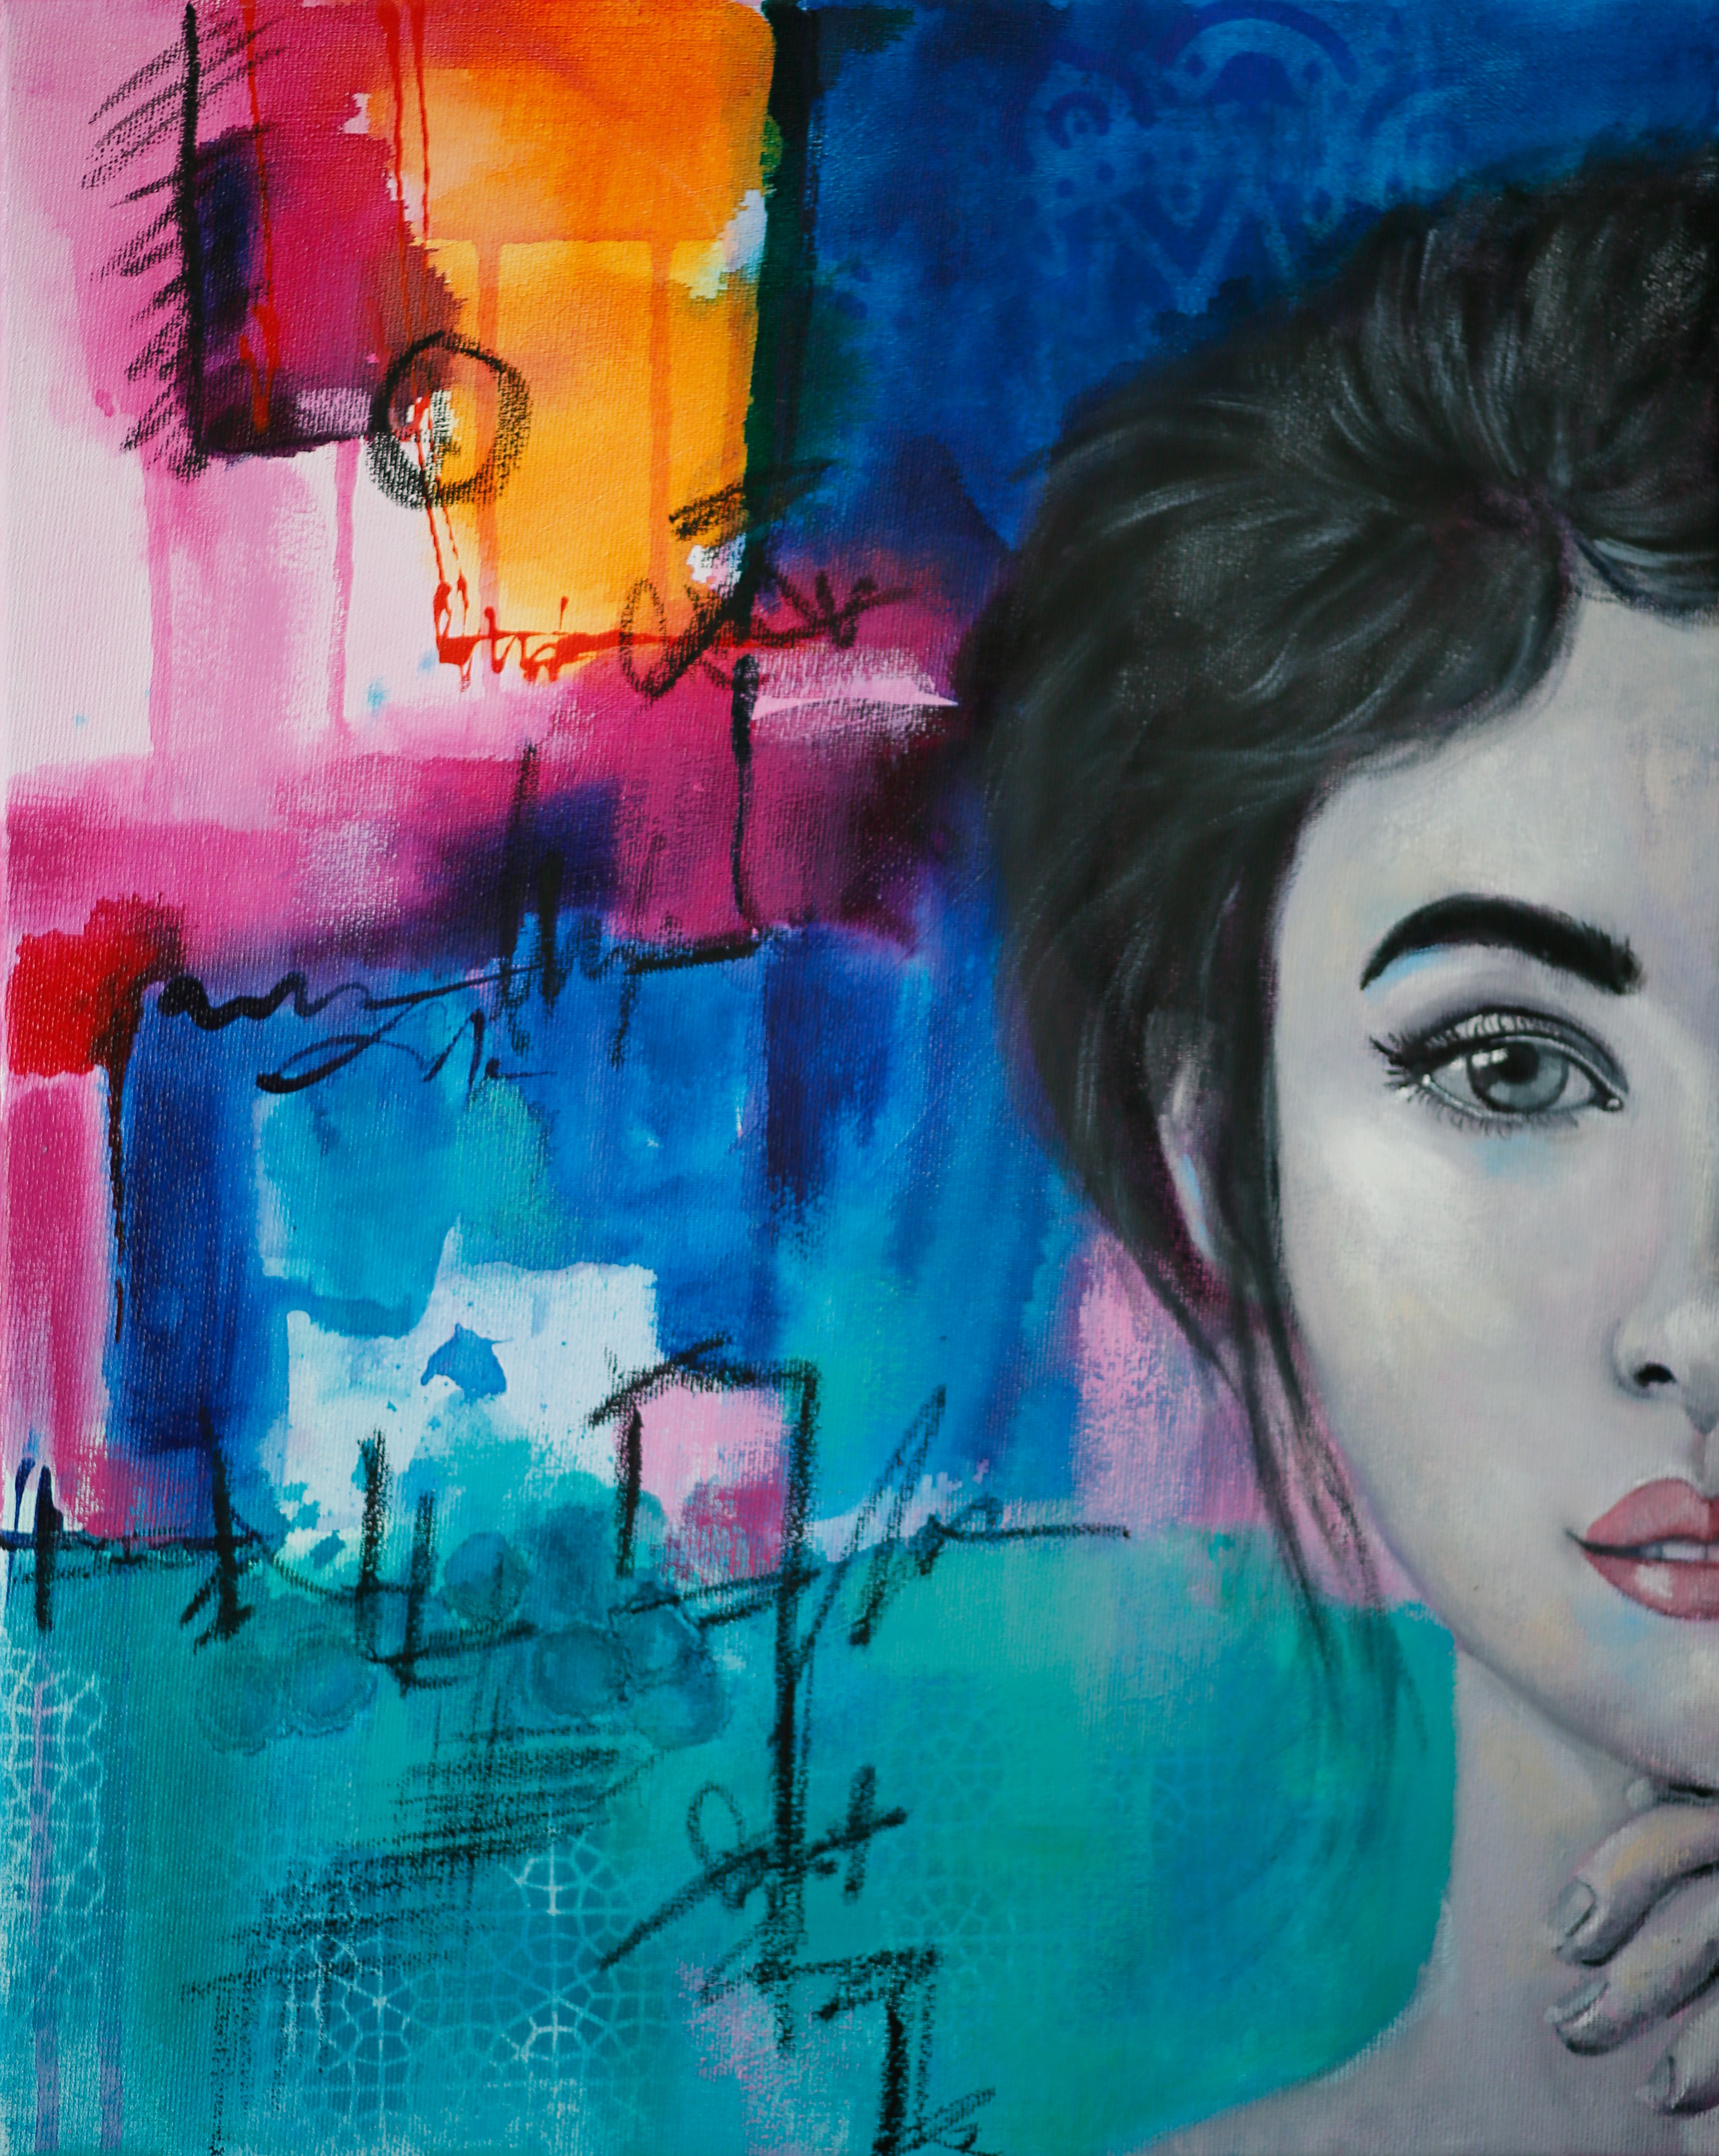 Colourful Abstract Realism Portrait in greyscale tones on colourful abstract bacground.